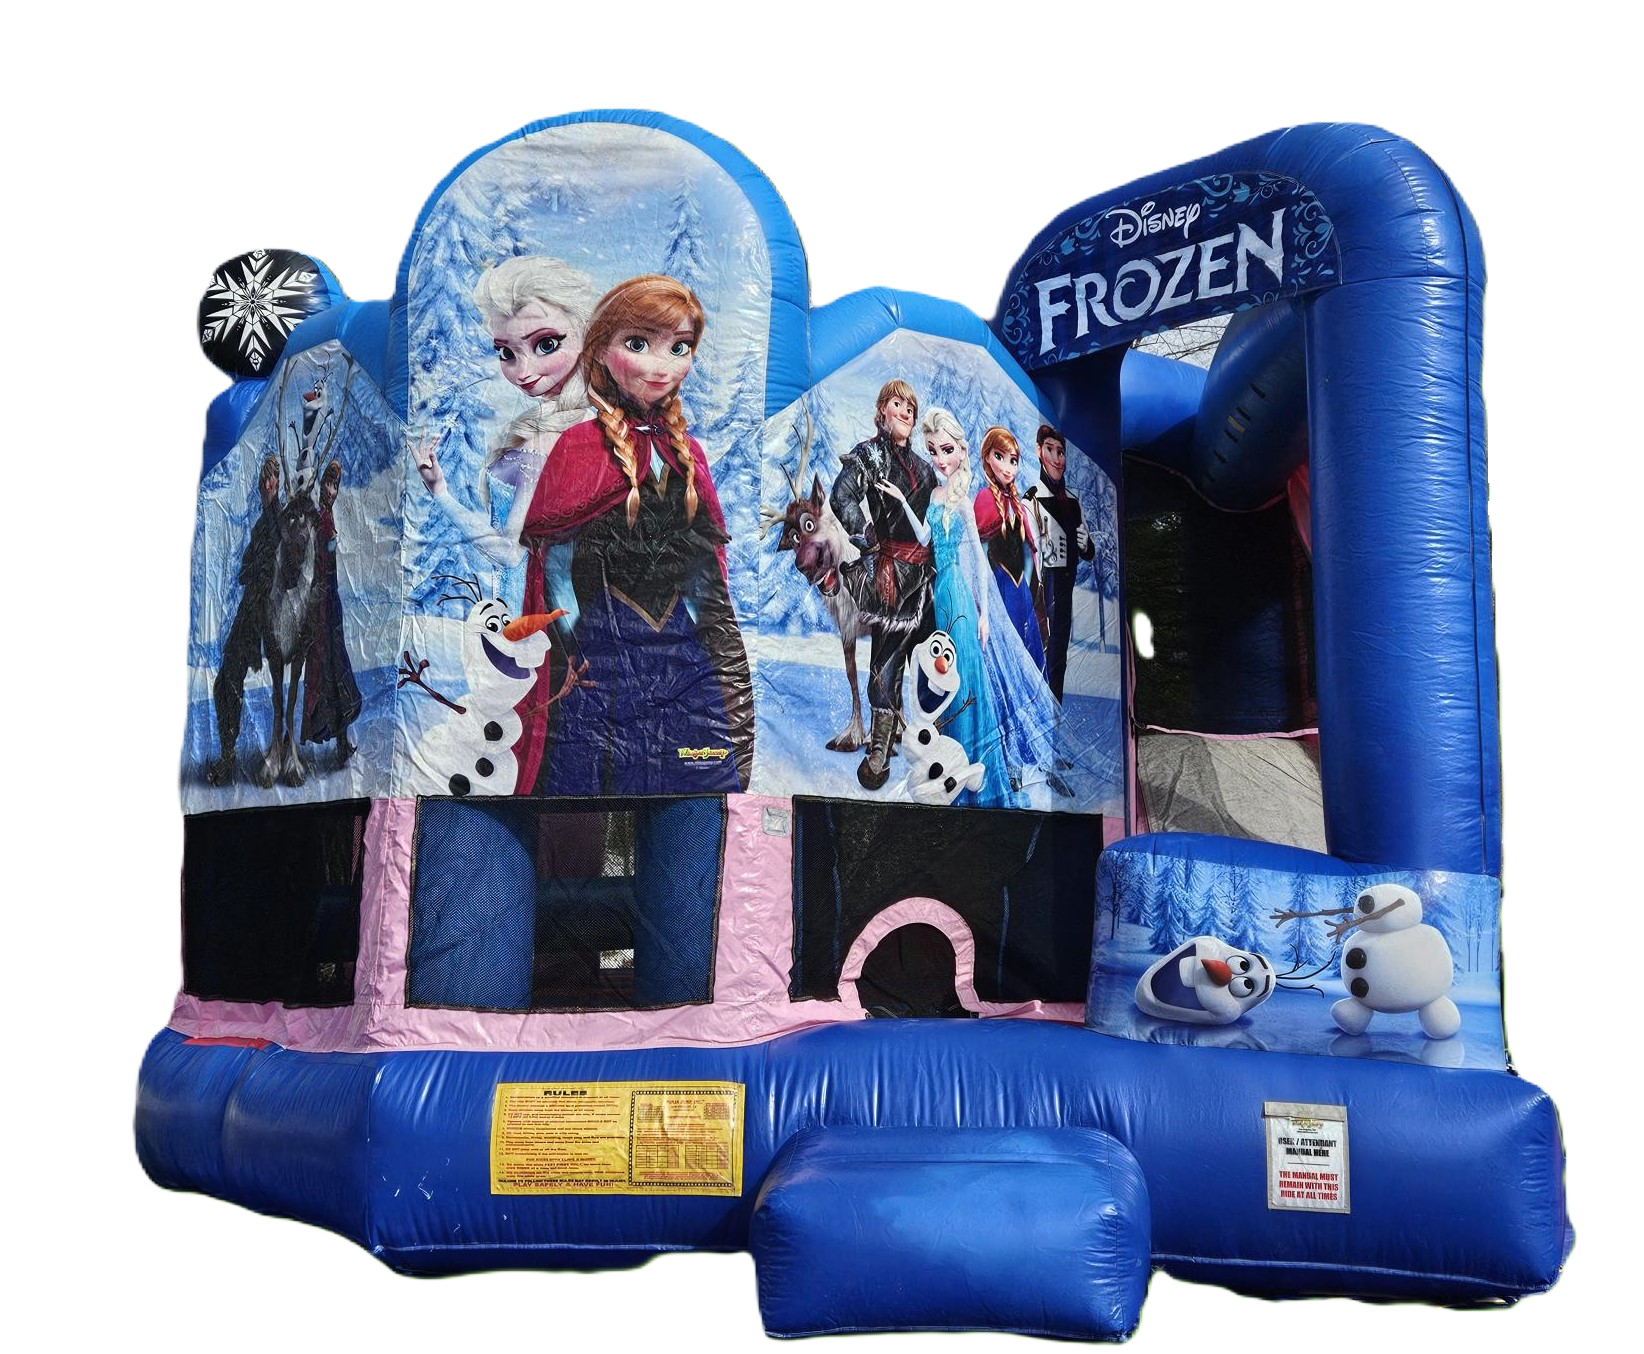 Large Frozen 5 in 1 Combo Bounce House BC1